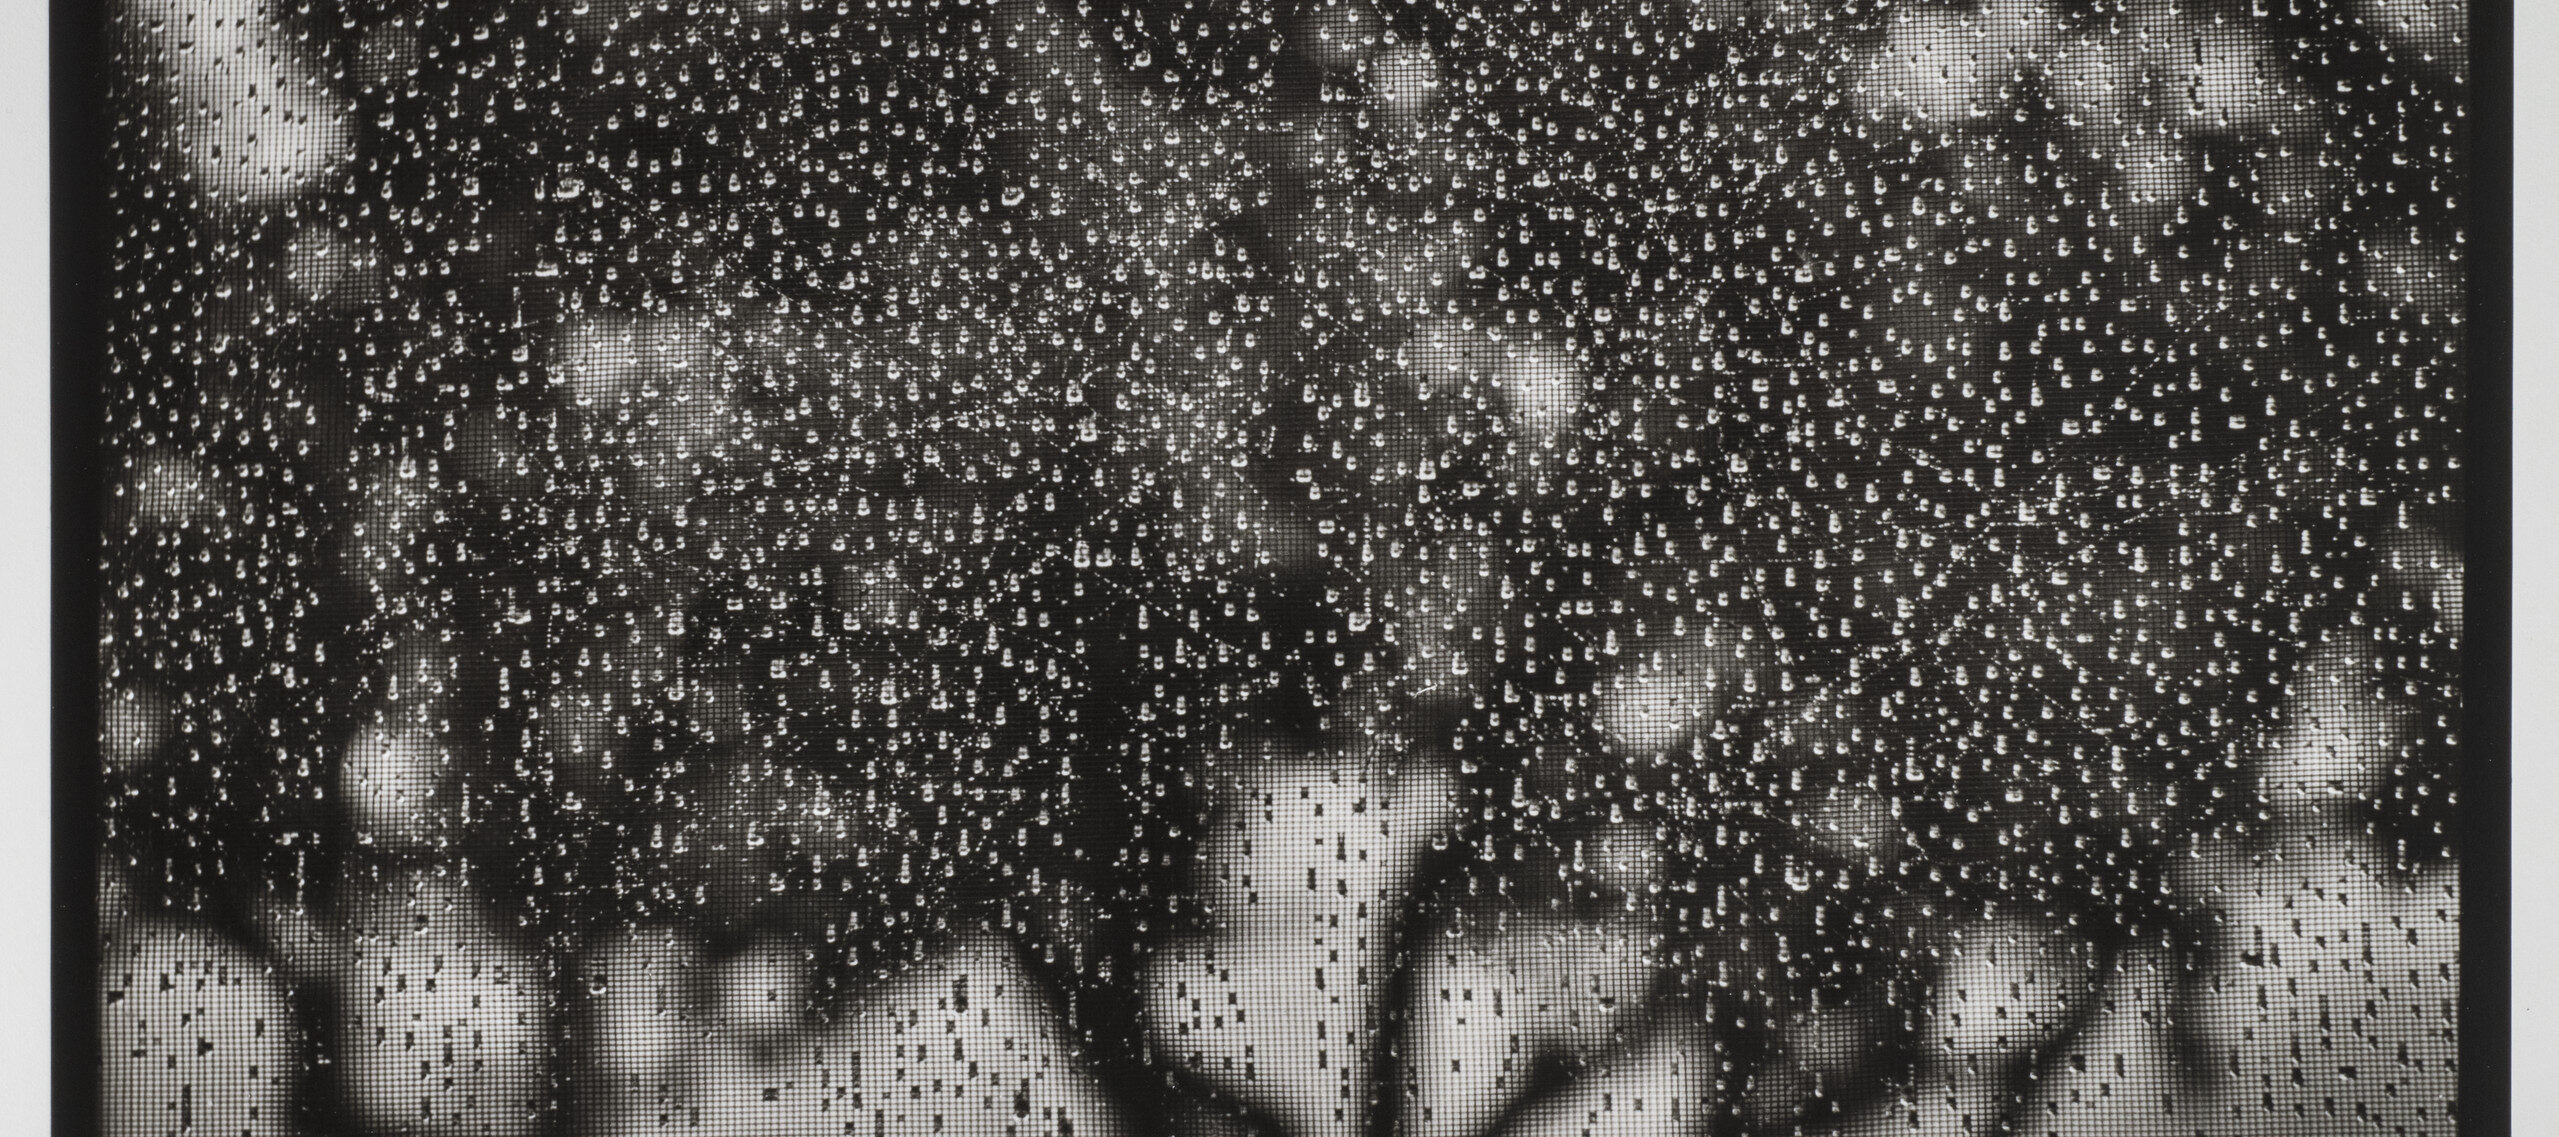 A black-and-white photo that is taken through a rain-spotted screen. Past the screen, the out-of-focus outline of a tree is visible, with a narrow trunk and many wayward branches that expand into a large canopy.